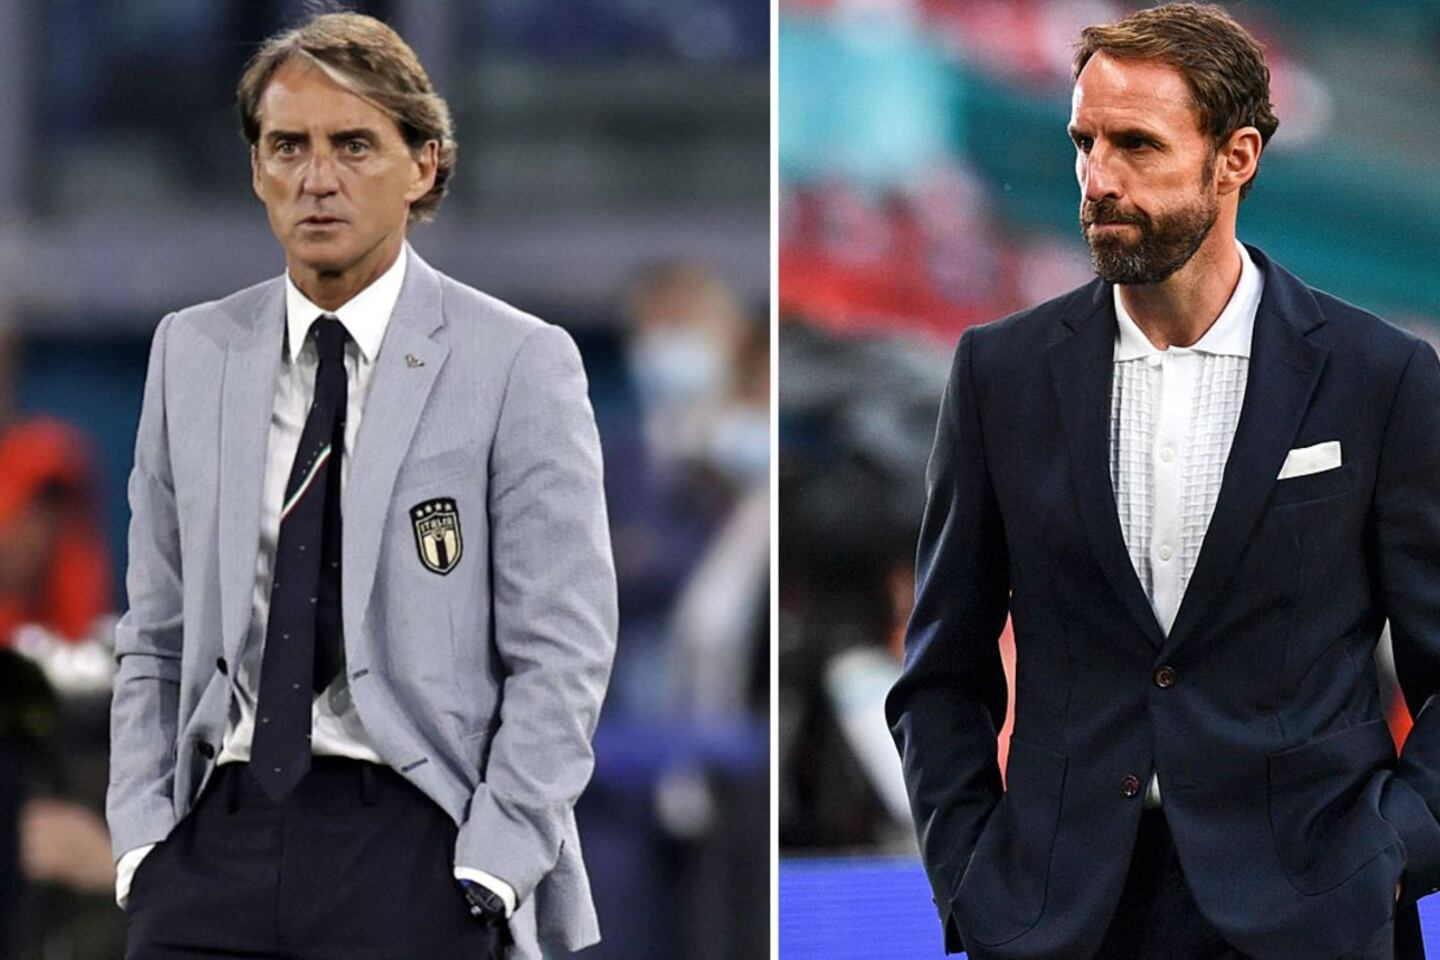 Euro 2020 final managers, Southgate and Mancini: who receives more salary and has more money?